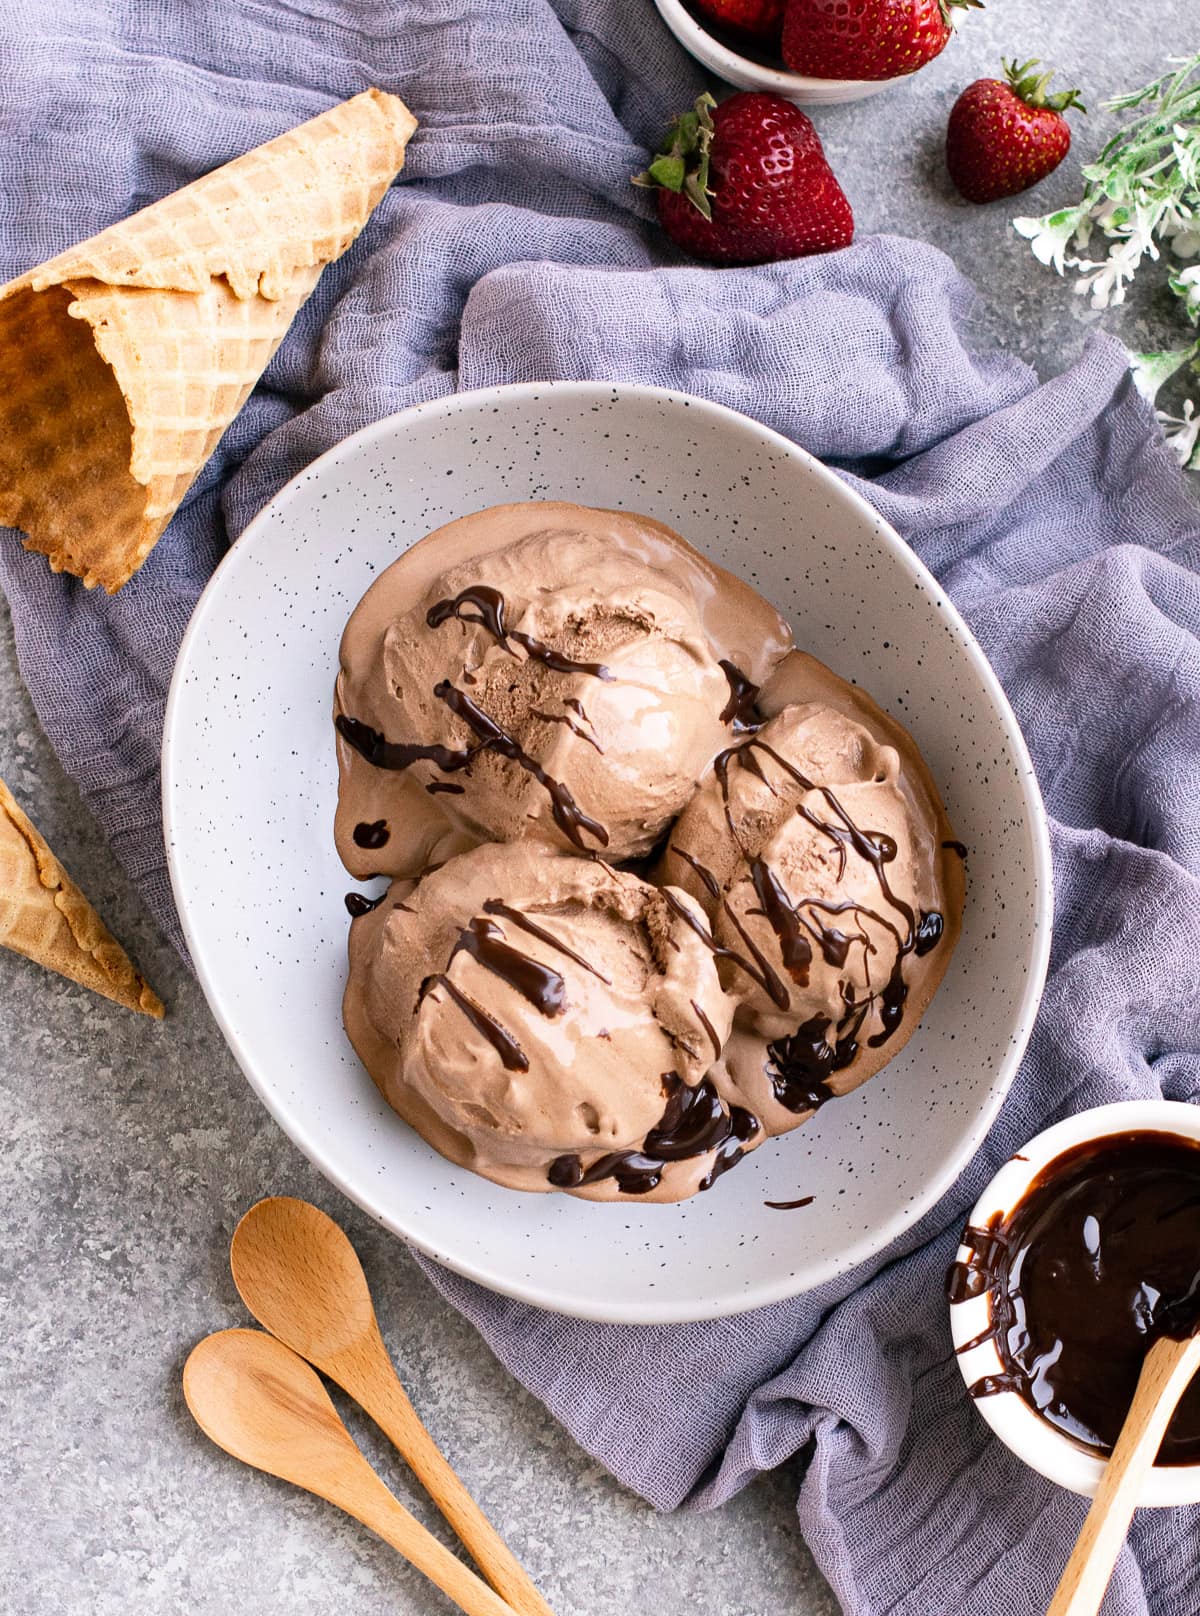 Chocolate ice cream served in a grey bowl with cone on the side